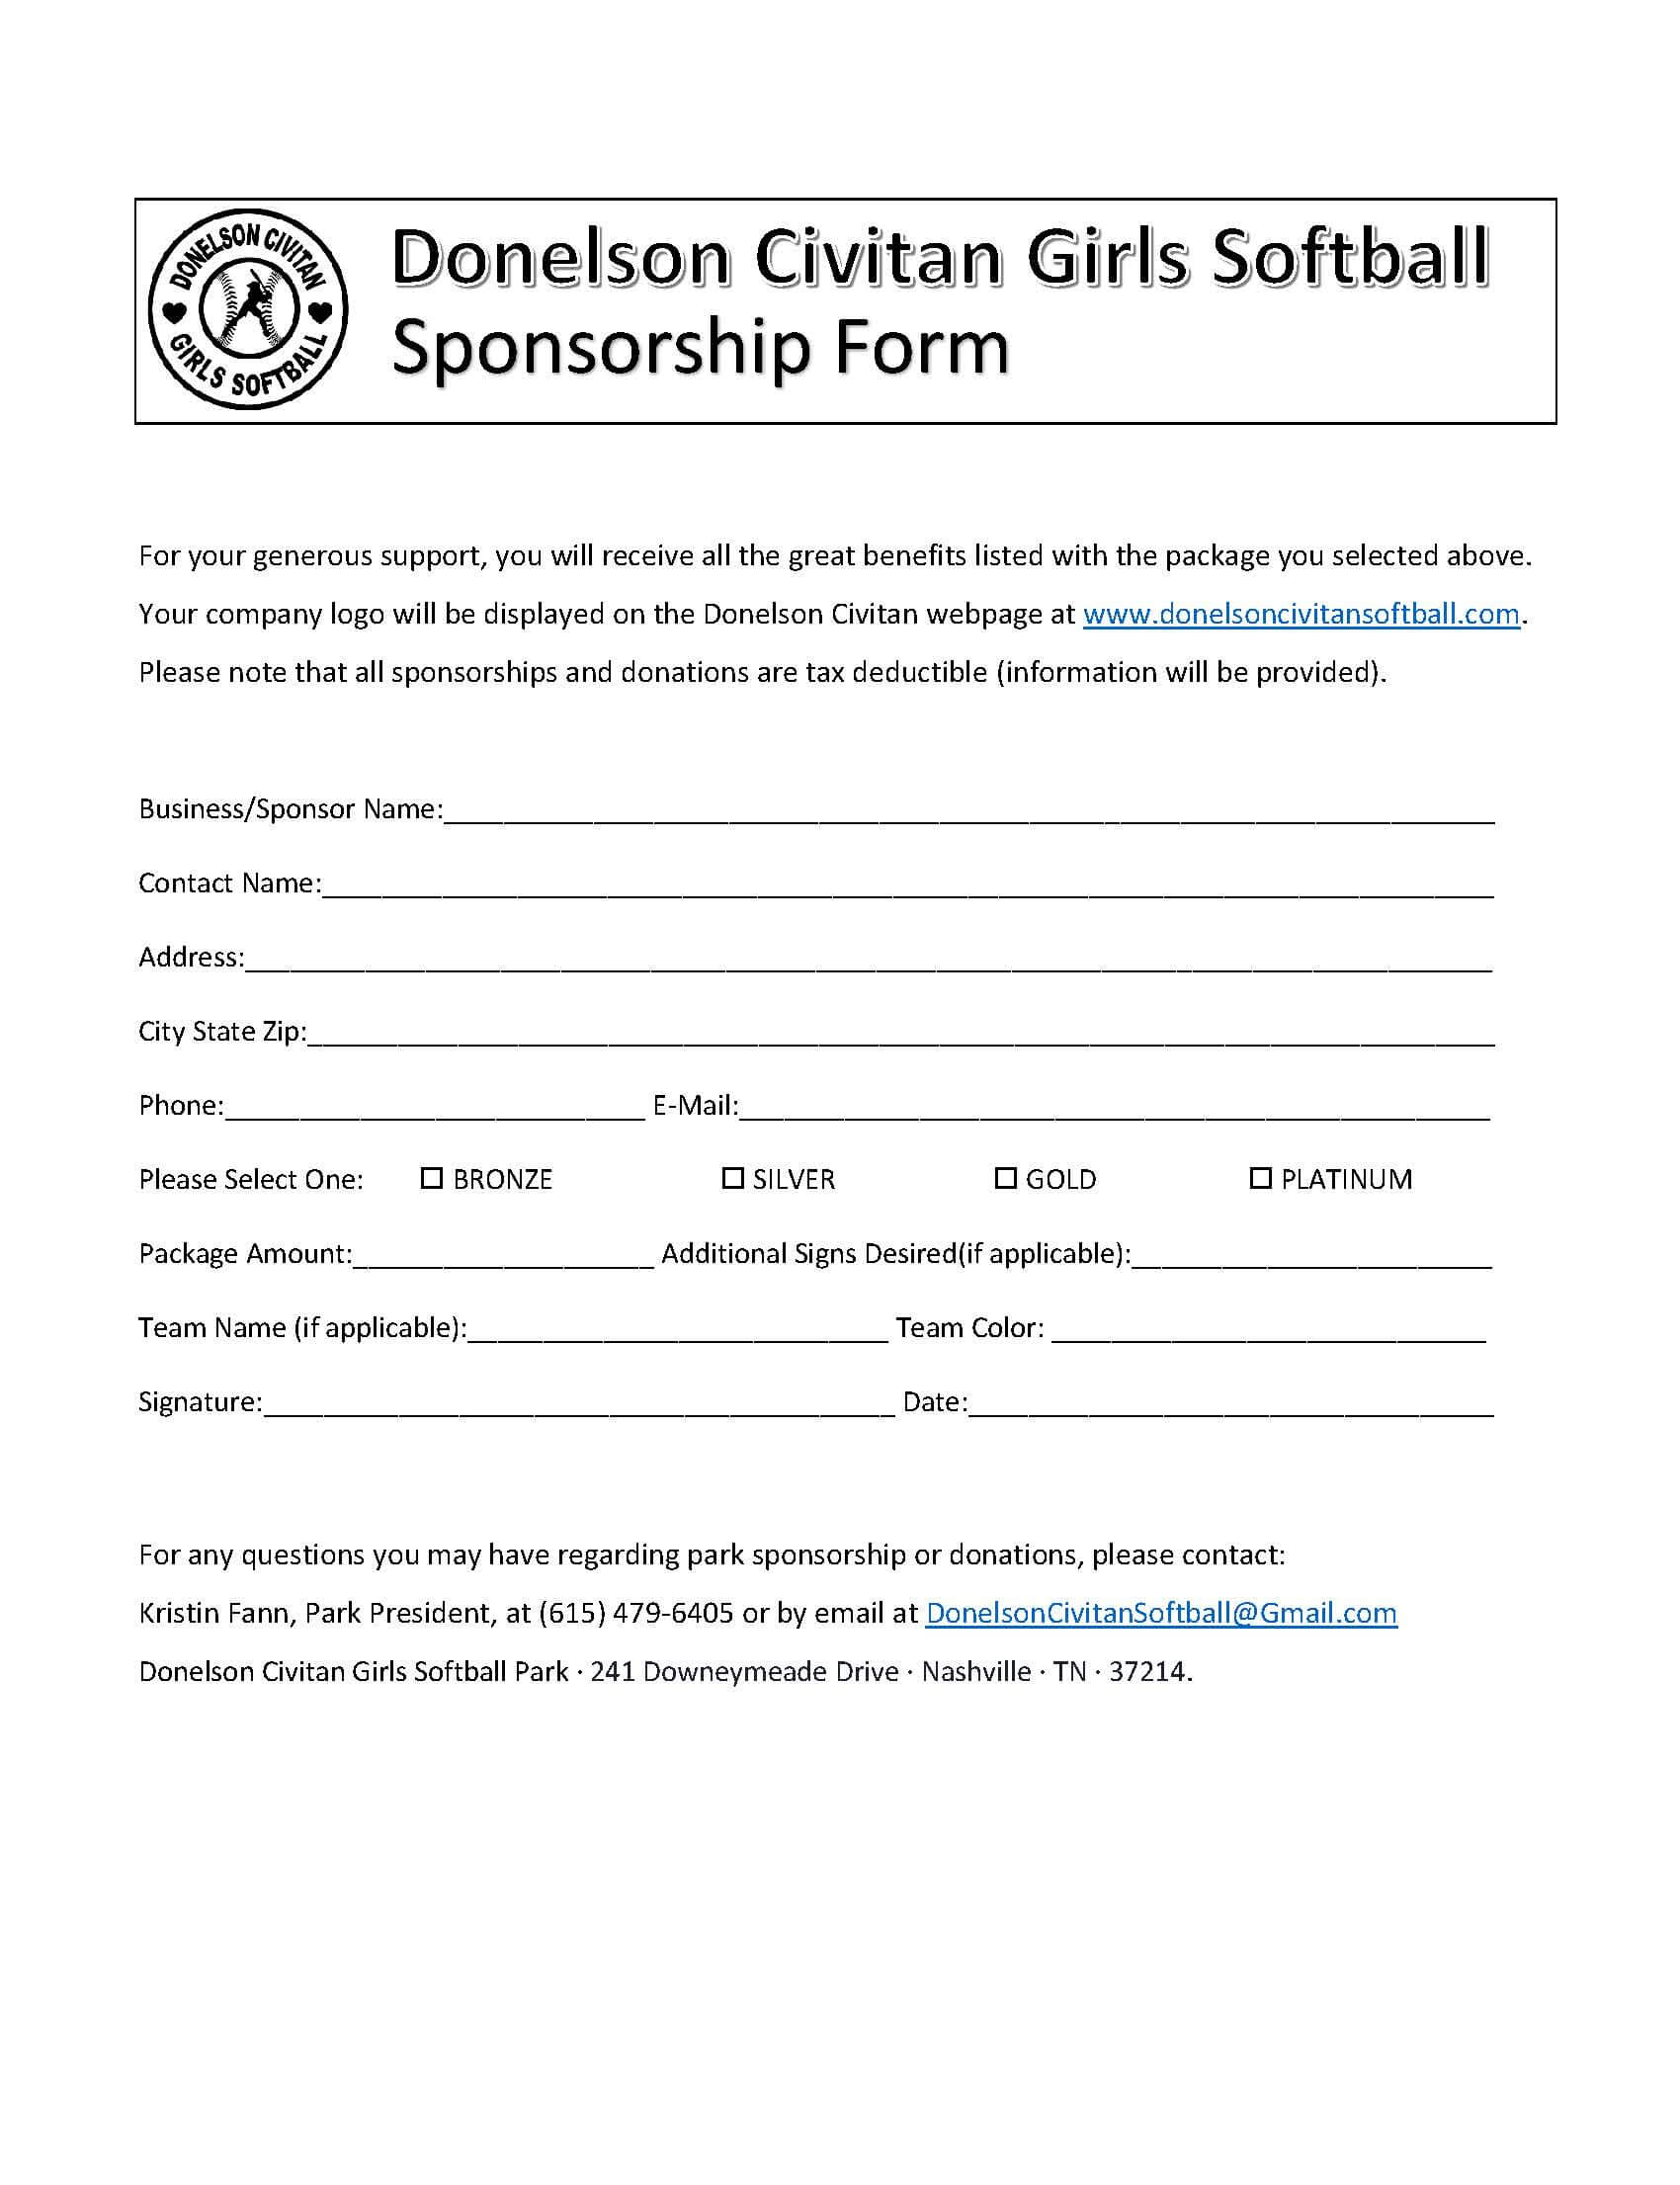 Sponsor Forms Templates Free ] – Template Sponsorship Form Within Blank Sponsorship Form Template